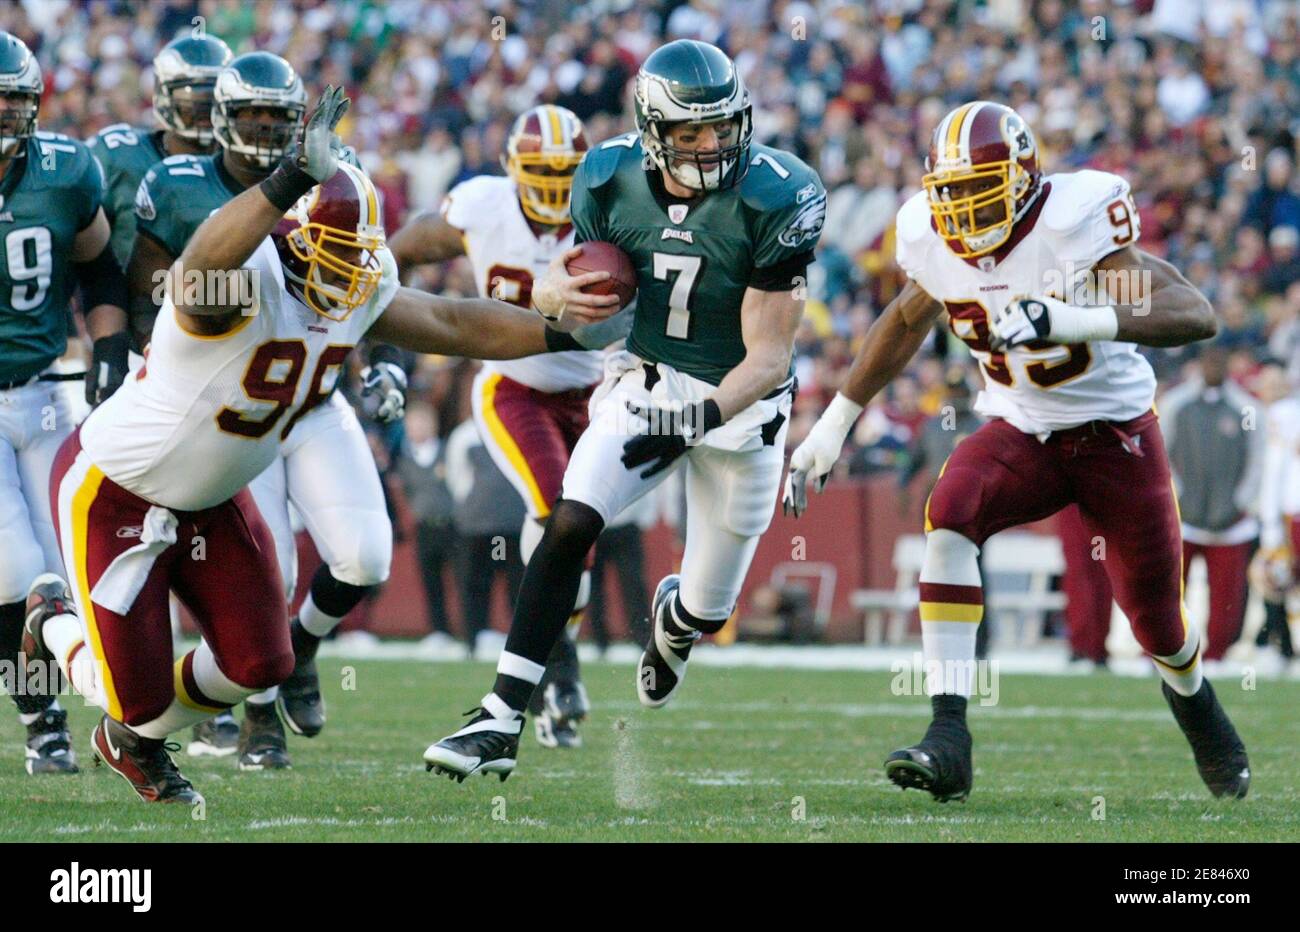 Philadelphia Eagles quarterback Jeff Garcia (C) scrambles for yardage in the first half while being pursued by Washington Redskins defenders Lemar Marshall (L) and Andre Carter (R) during their NFL football game in Landover, Maryland December 10, 2006.      REUTERS/Gary Cameron  (UNITED STATES) Stock Photo